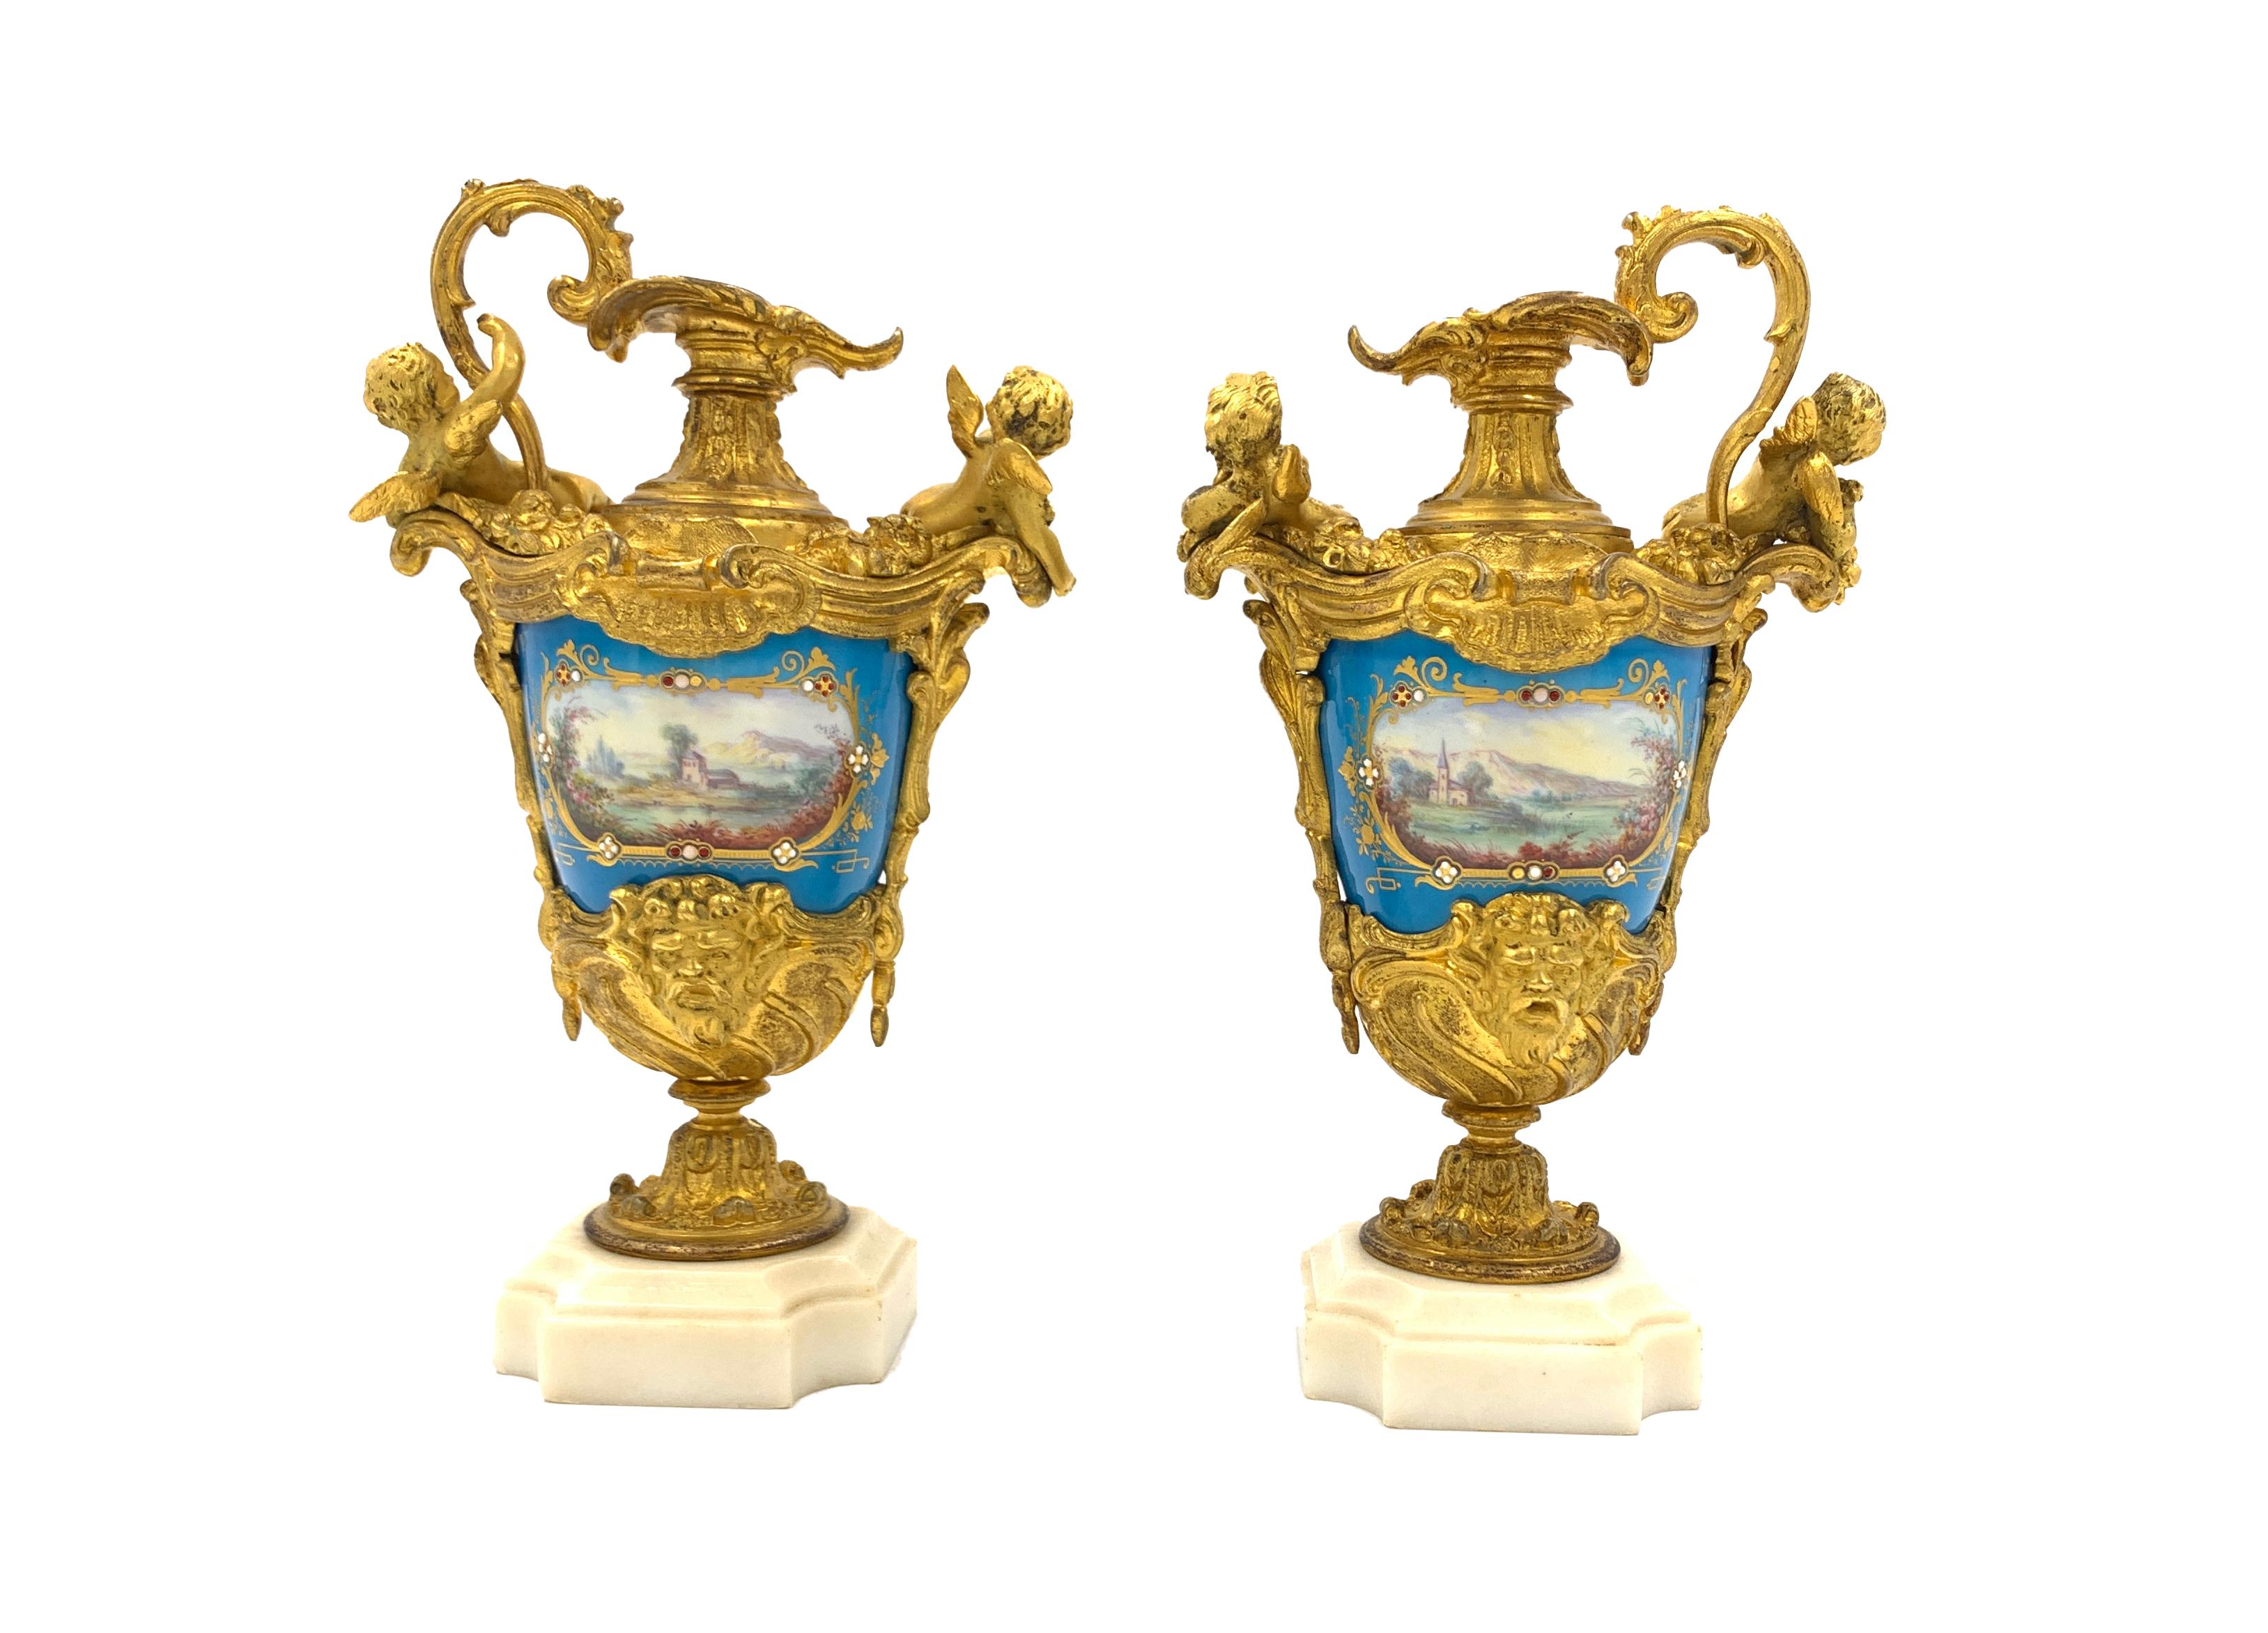 A fine pair of 19th century Sevres style jewelled porcelain and gilt metal ewer vases, decorated with cherubs and romantic continental scenes, on white marble bases.
 